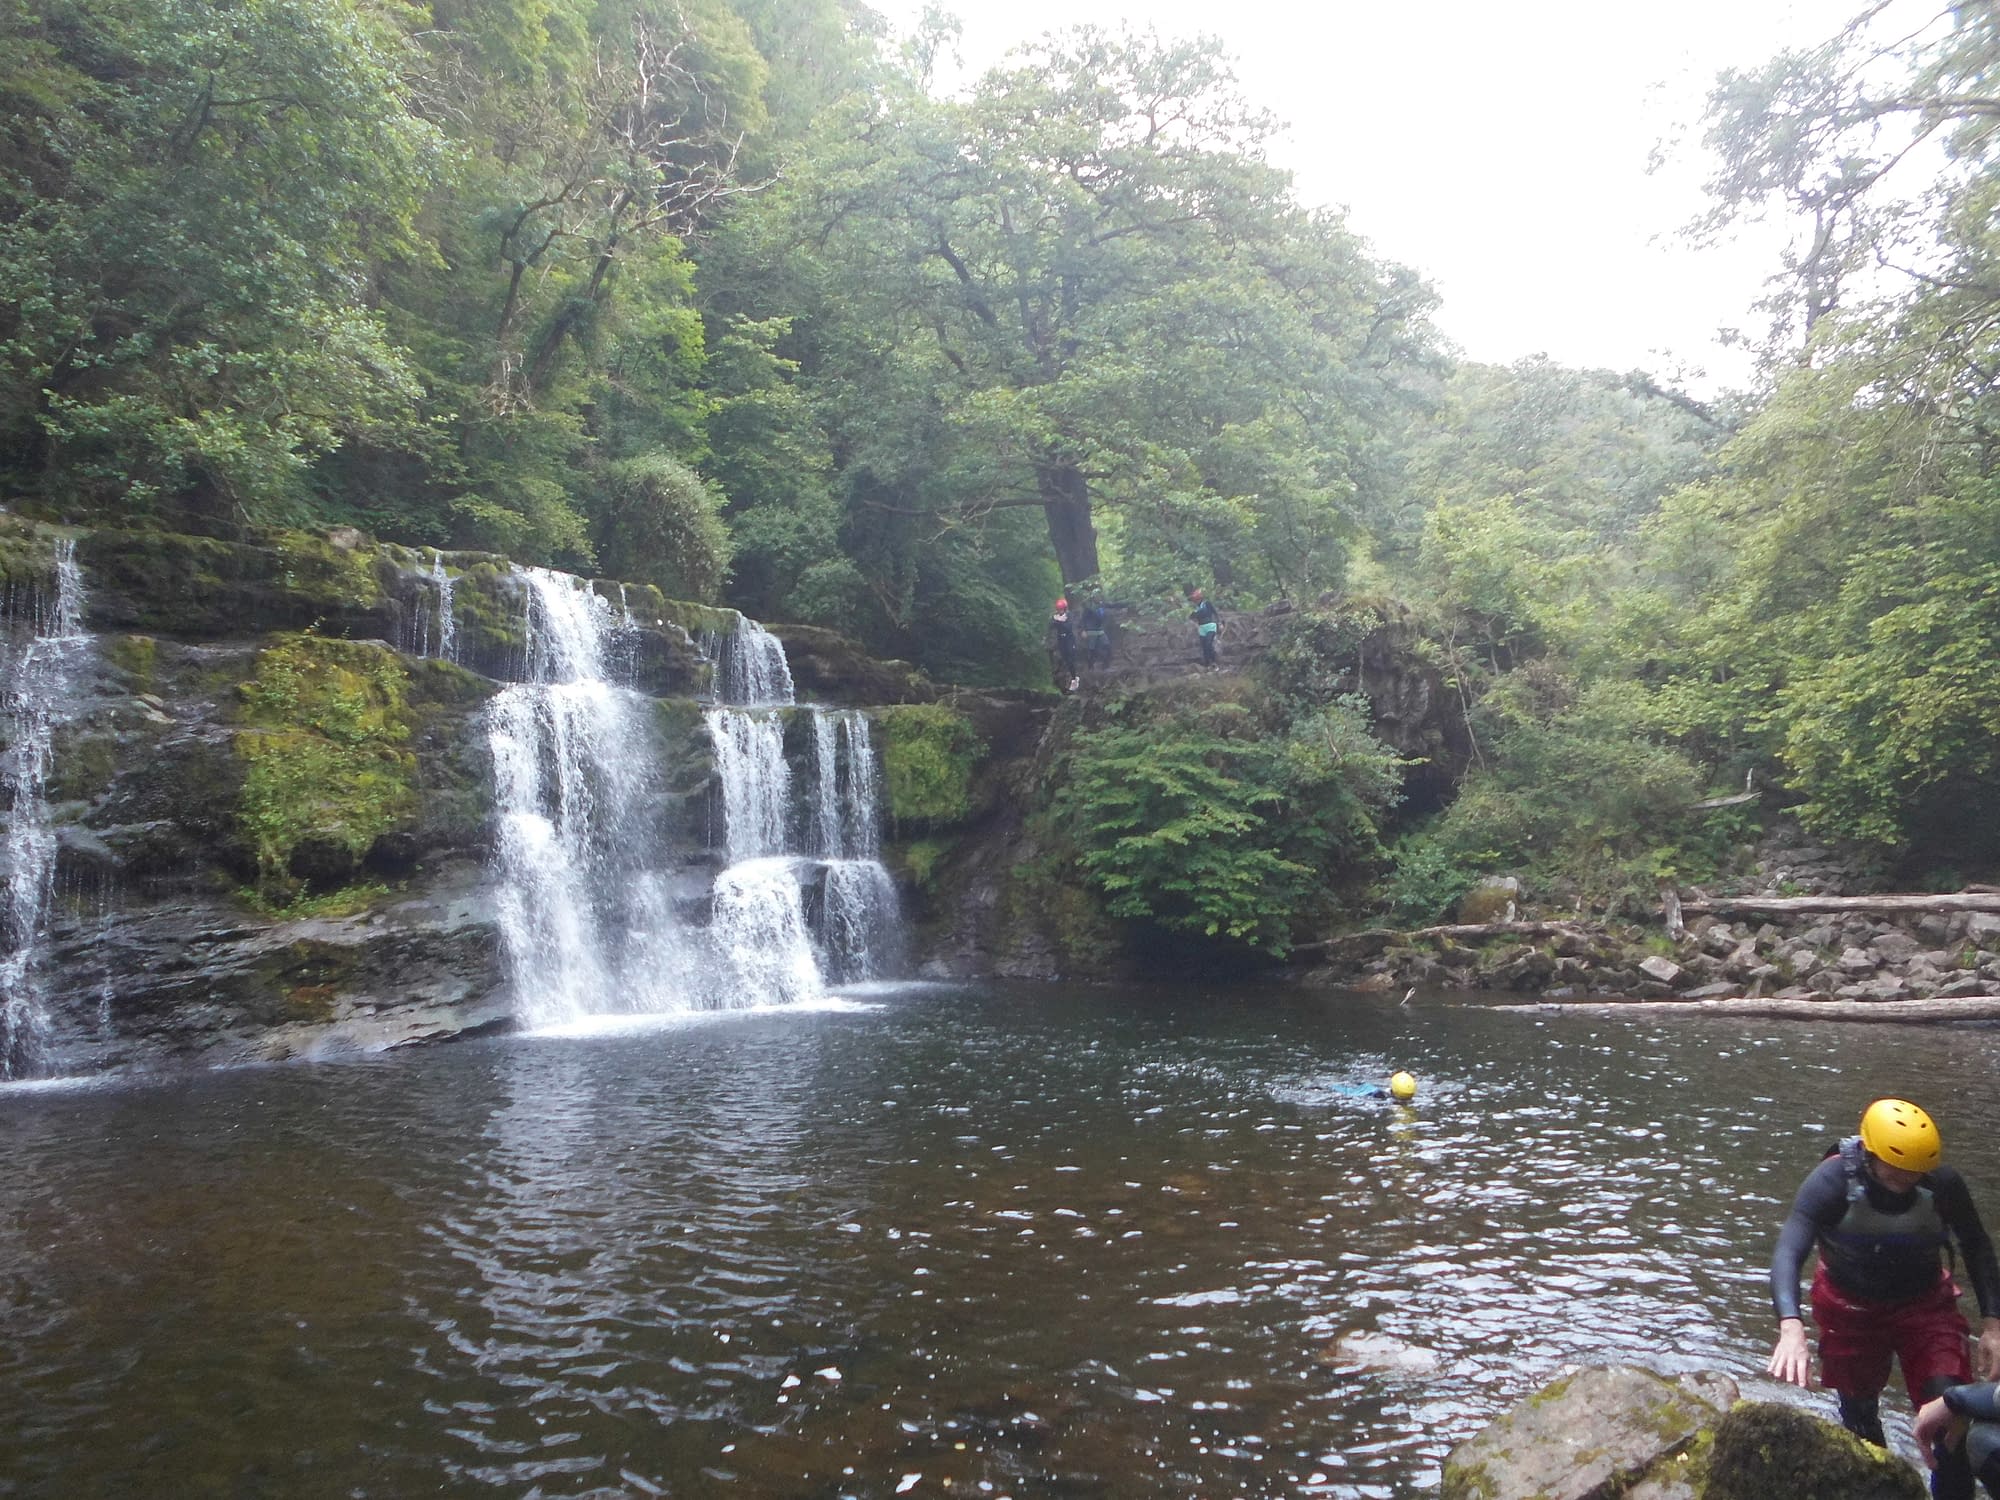 A beautiful waterfall in on of Brecon Beacons National Park gorges